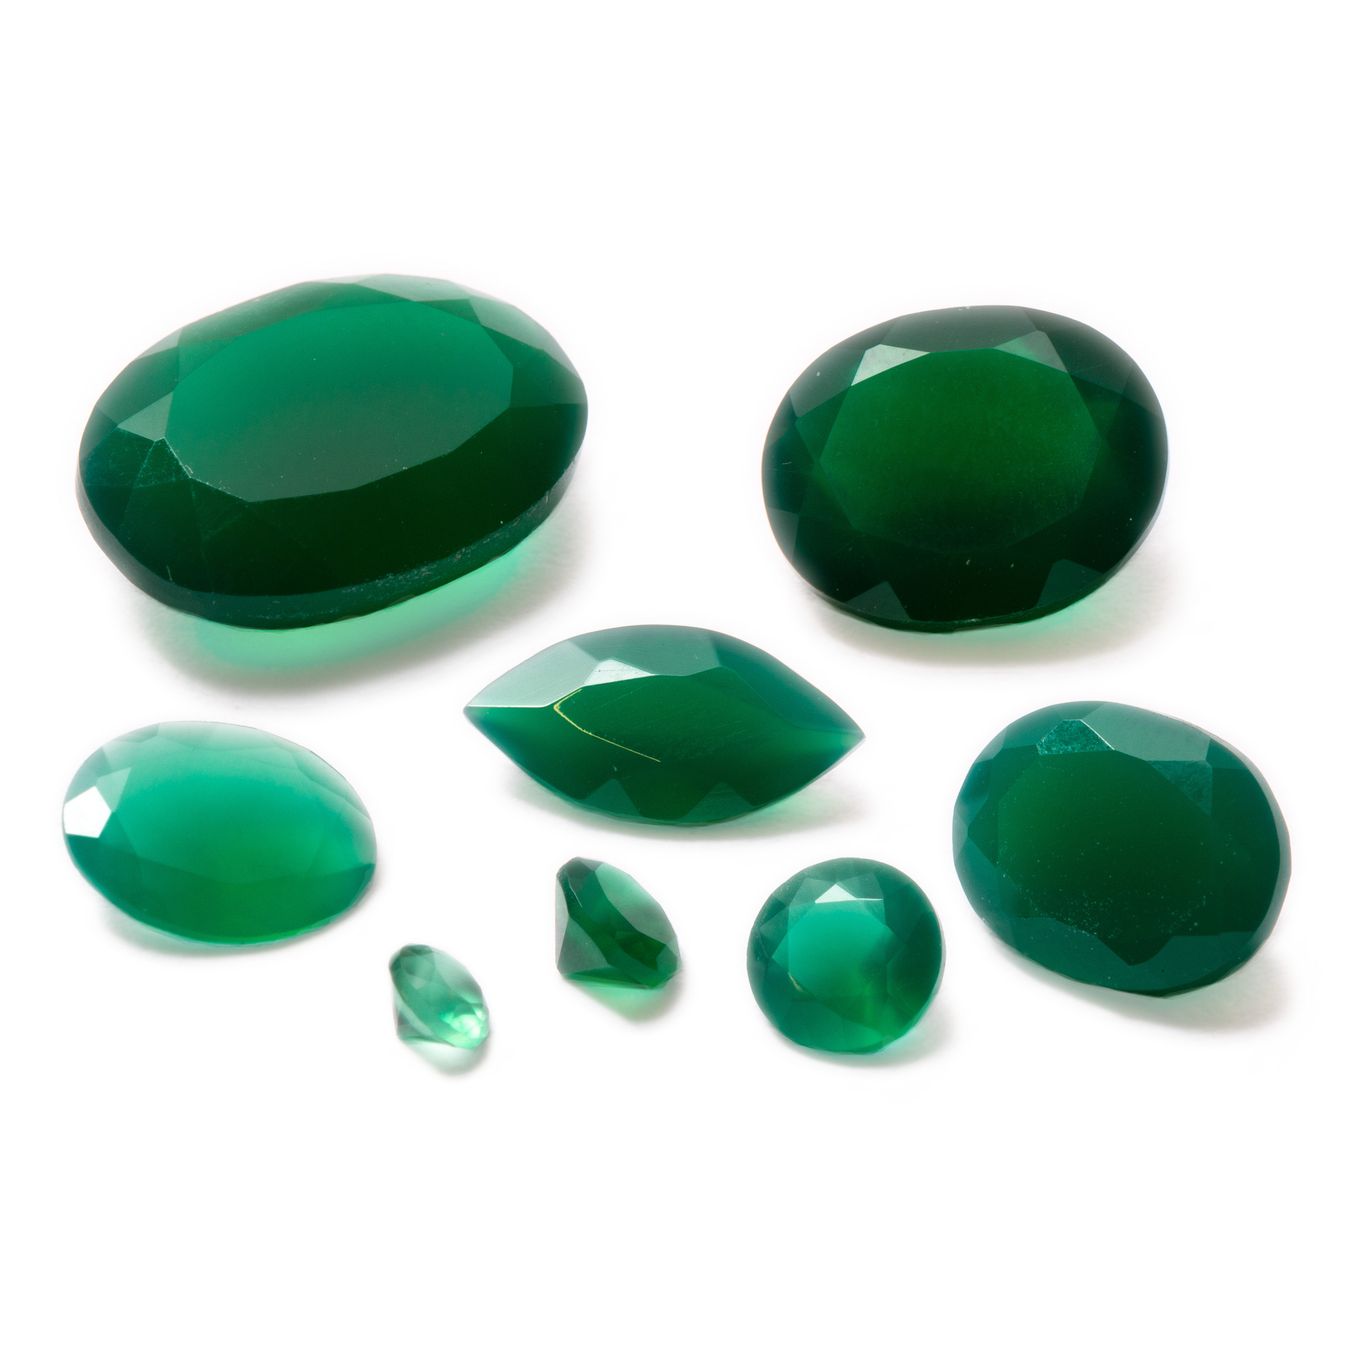 Green Agate Faceted Stones